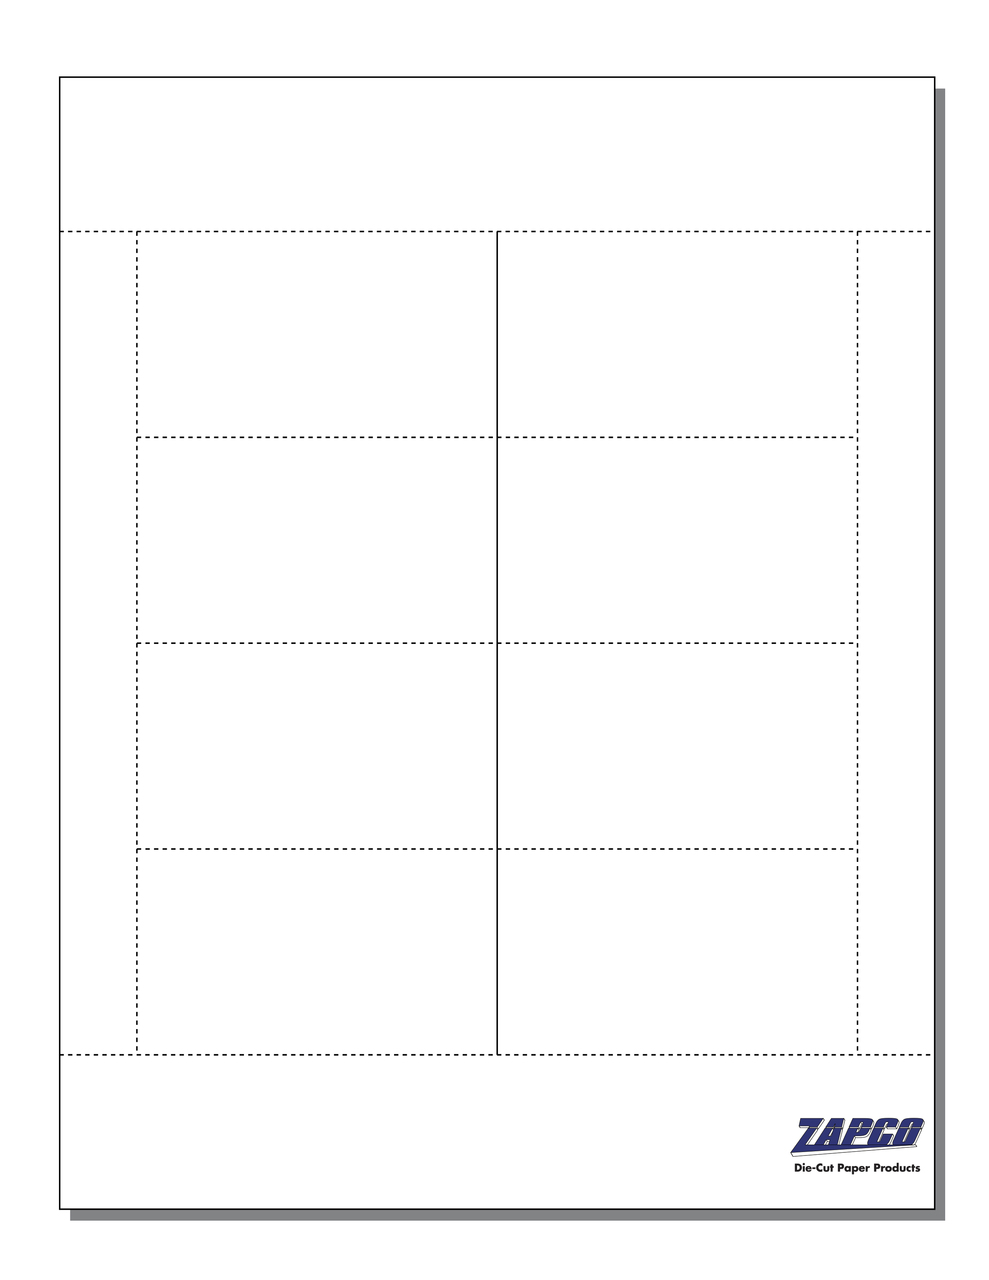 Item 596: 4-Up 3 1/2 x 2 Fold-over Business Card Paper 8 1/2 x 11 Sheet  (250 Sheets)